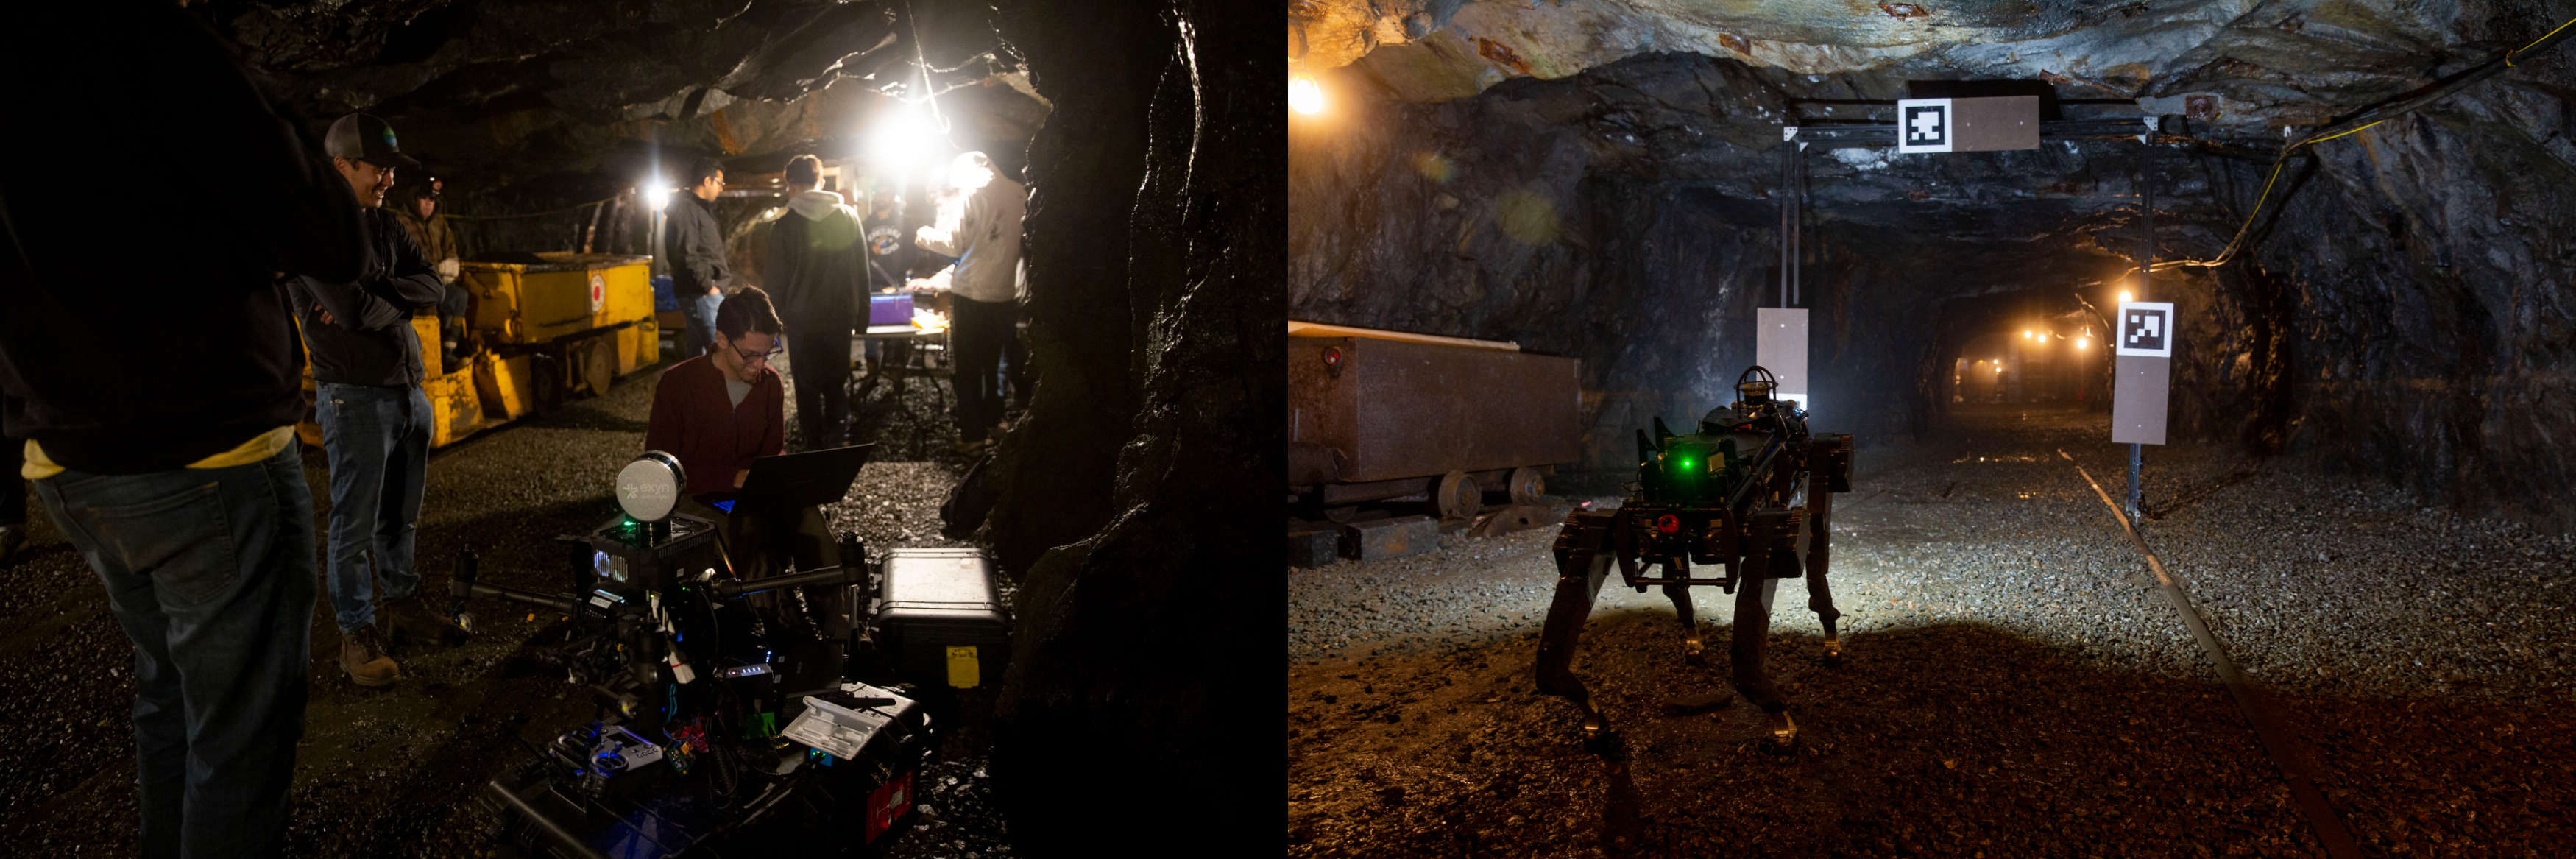 on the left, a group of students working on robots and at computers in a cave, on the right, a legged robot waits in front of an archway with QR codes